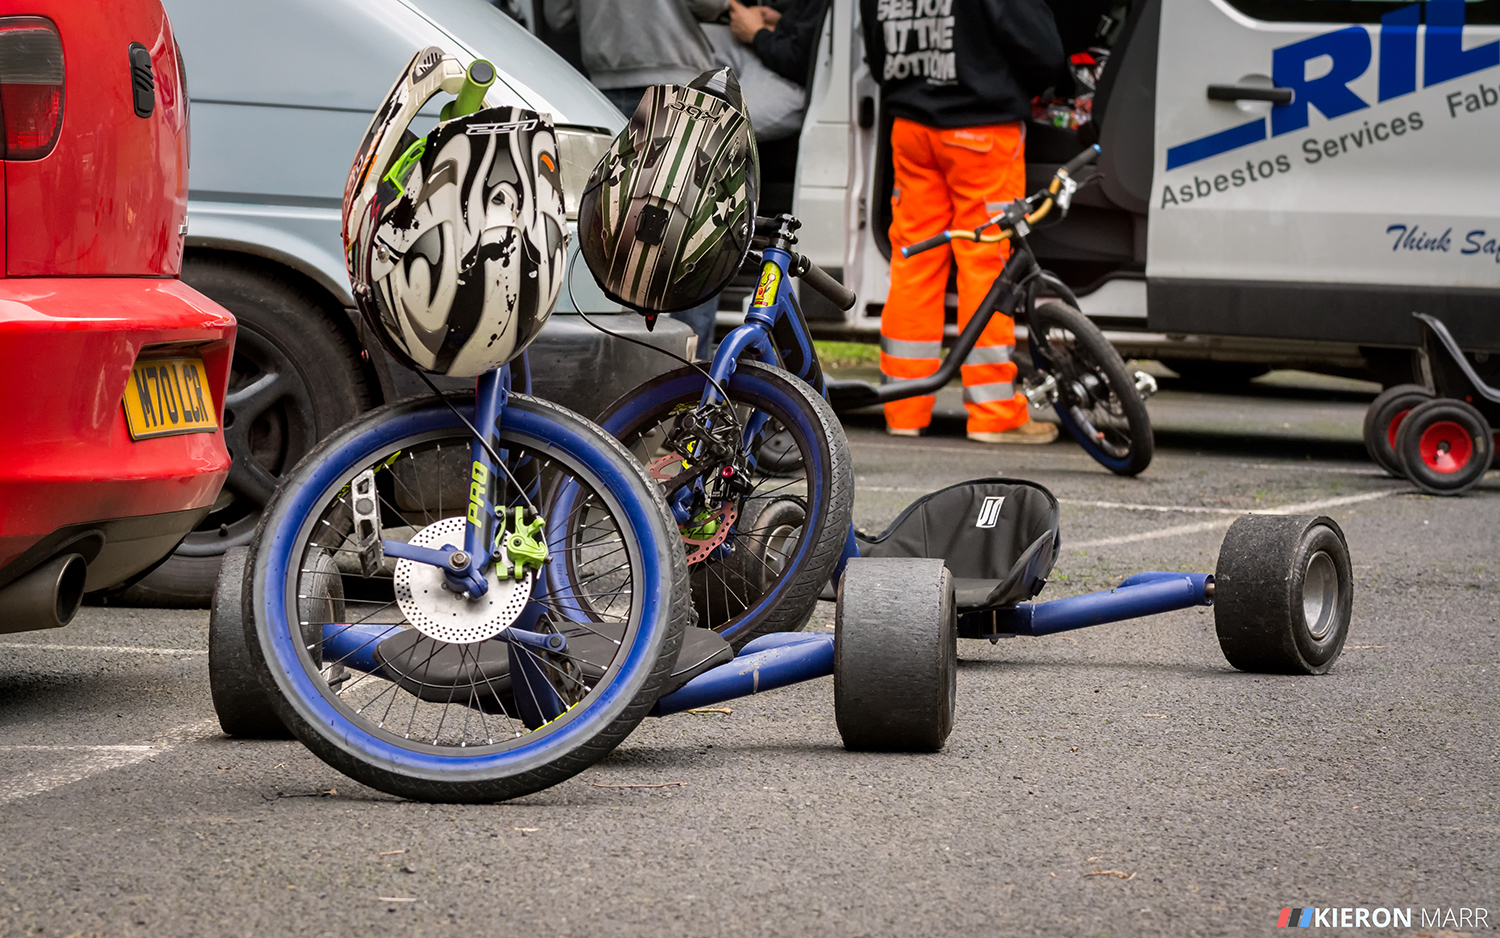 Drift trikes and safety equipment